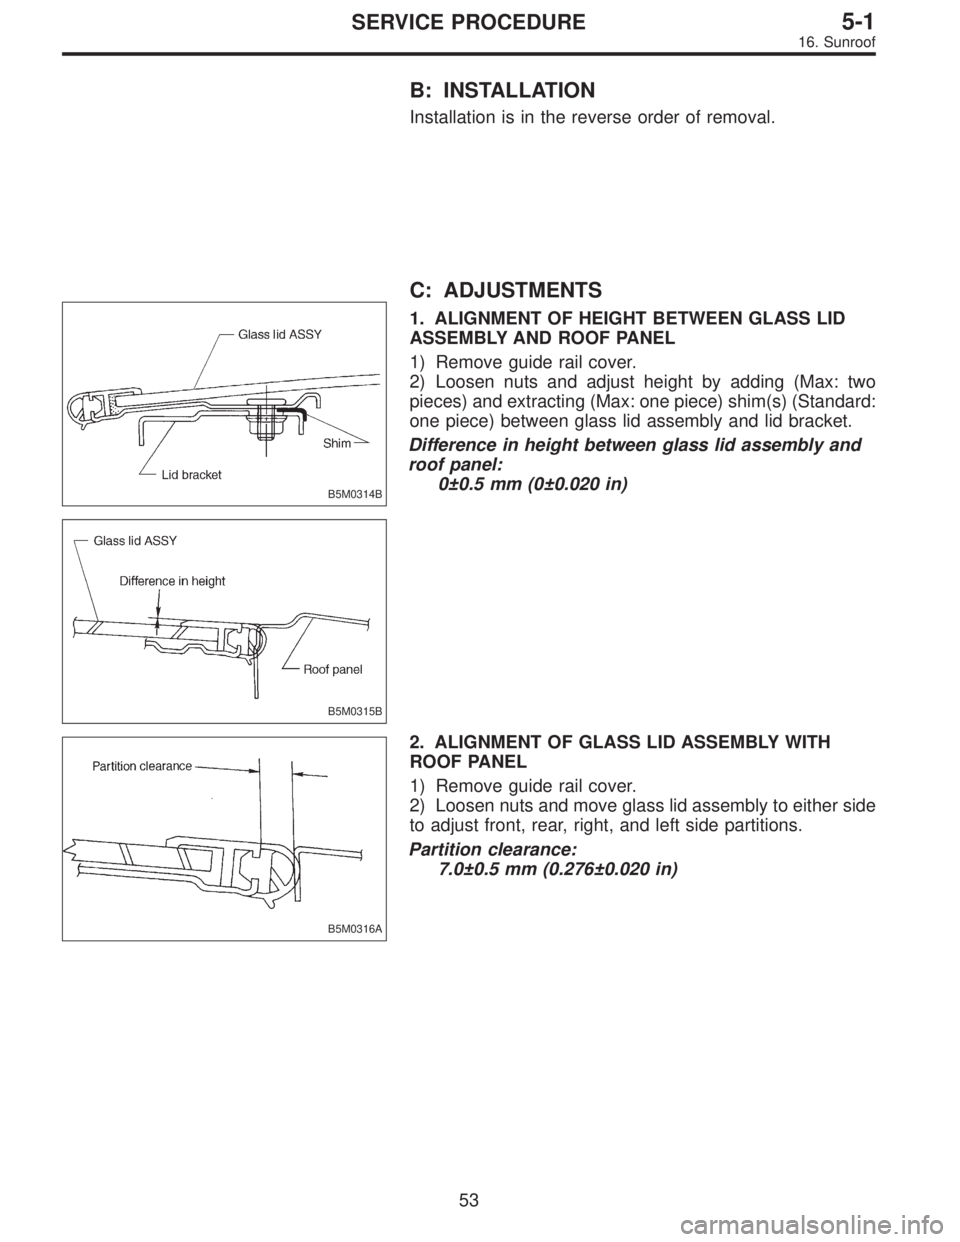 SUBARU LEGACY 1995  Service Repair Manual B: INSTALLATION
Installation is in the reverse order of removal.
B5M0314B
B5M0315B
C: ADJUSTMENTS
1. ALIGNMENT OF HEIGHT BETWEEN GLASS LID
ASSEMBLY AND ROOF PANEL
1) Remove guide rail cover.
2) Loosen